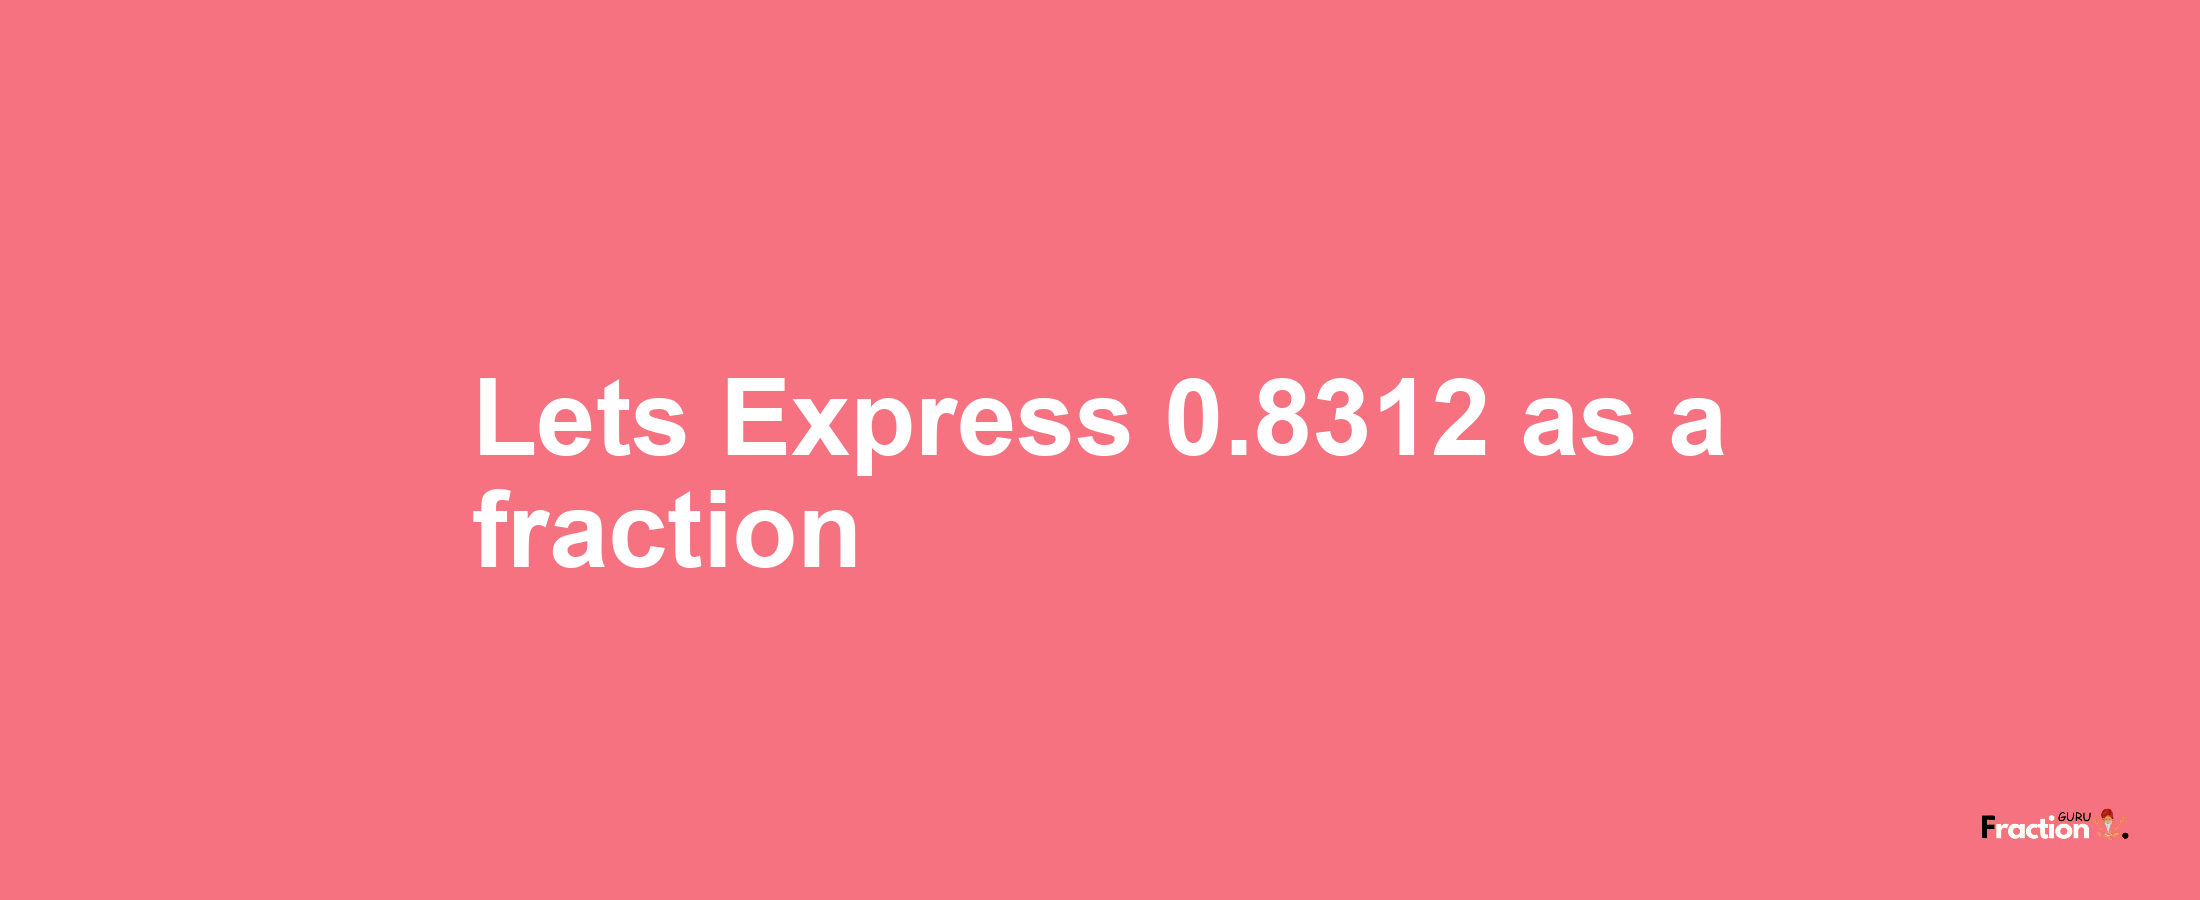 Lets Express 0.8312 as afraction